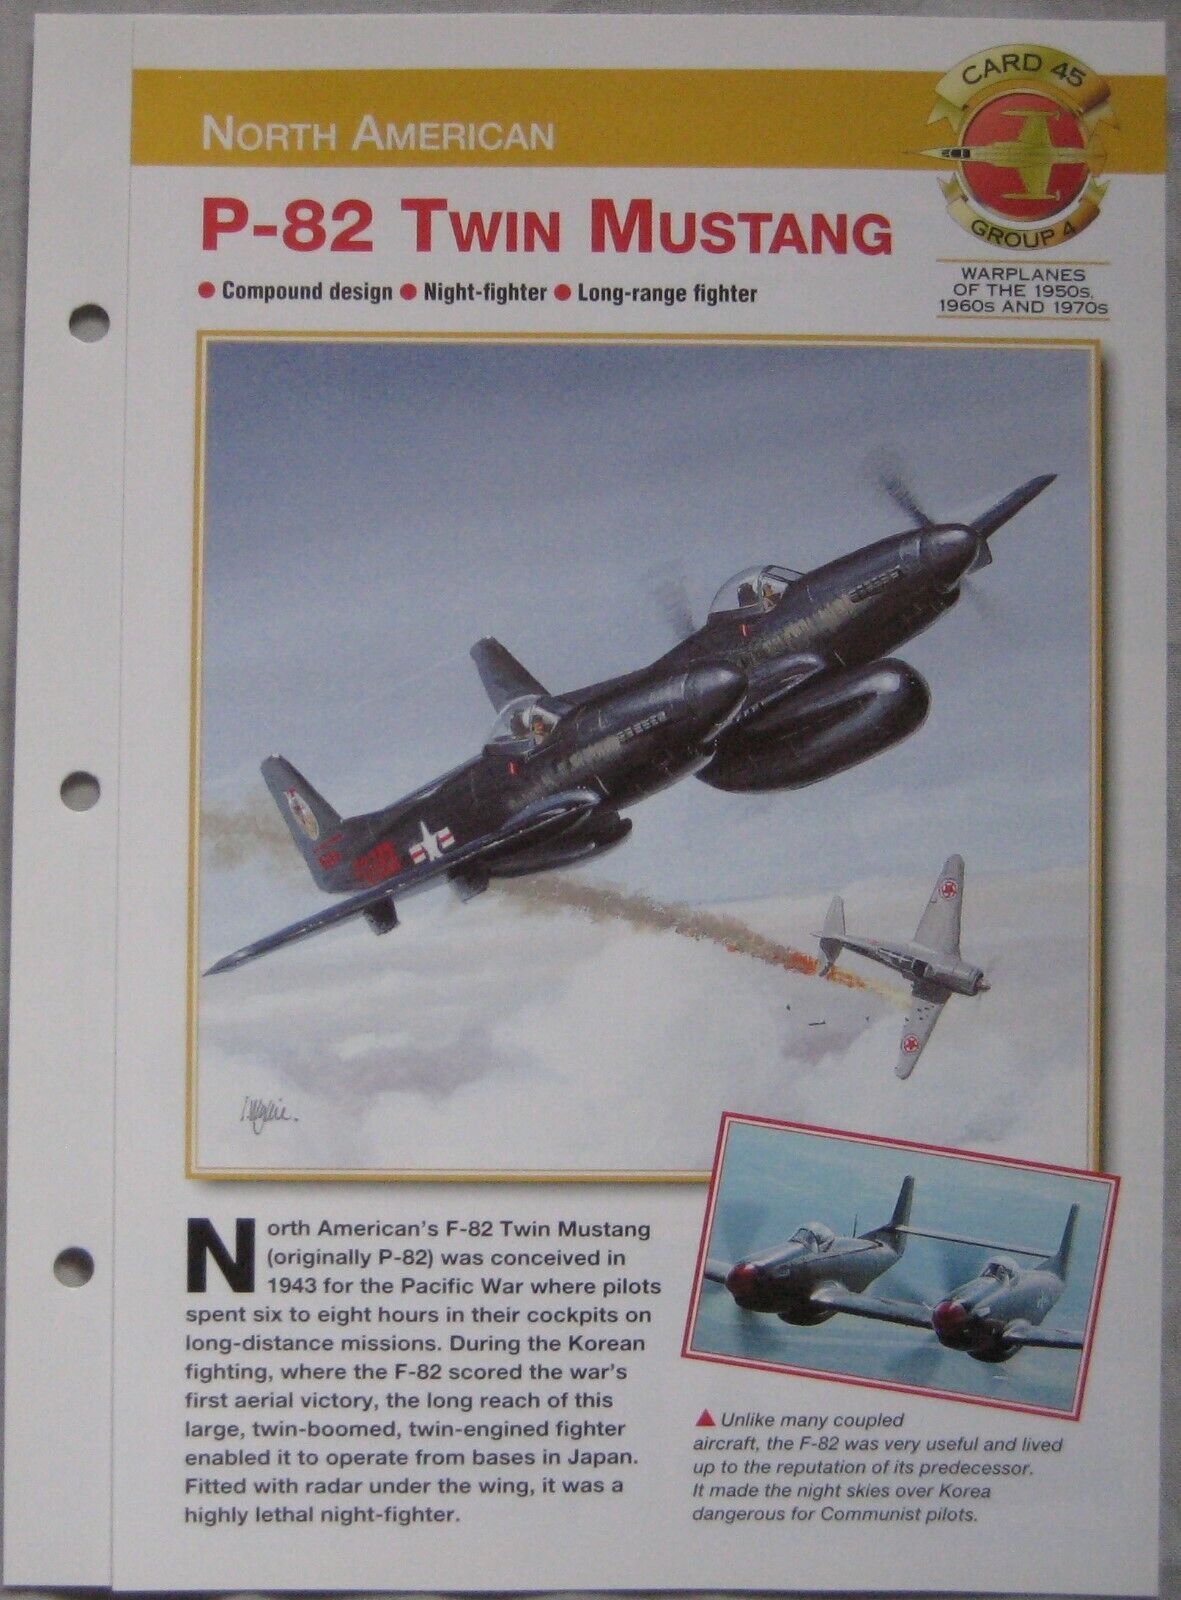 Aircraft of the World Card 45 , Group 4 - North American P-82 Twin Mustang